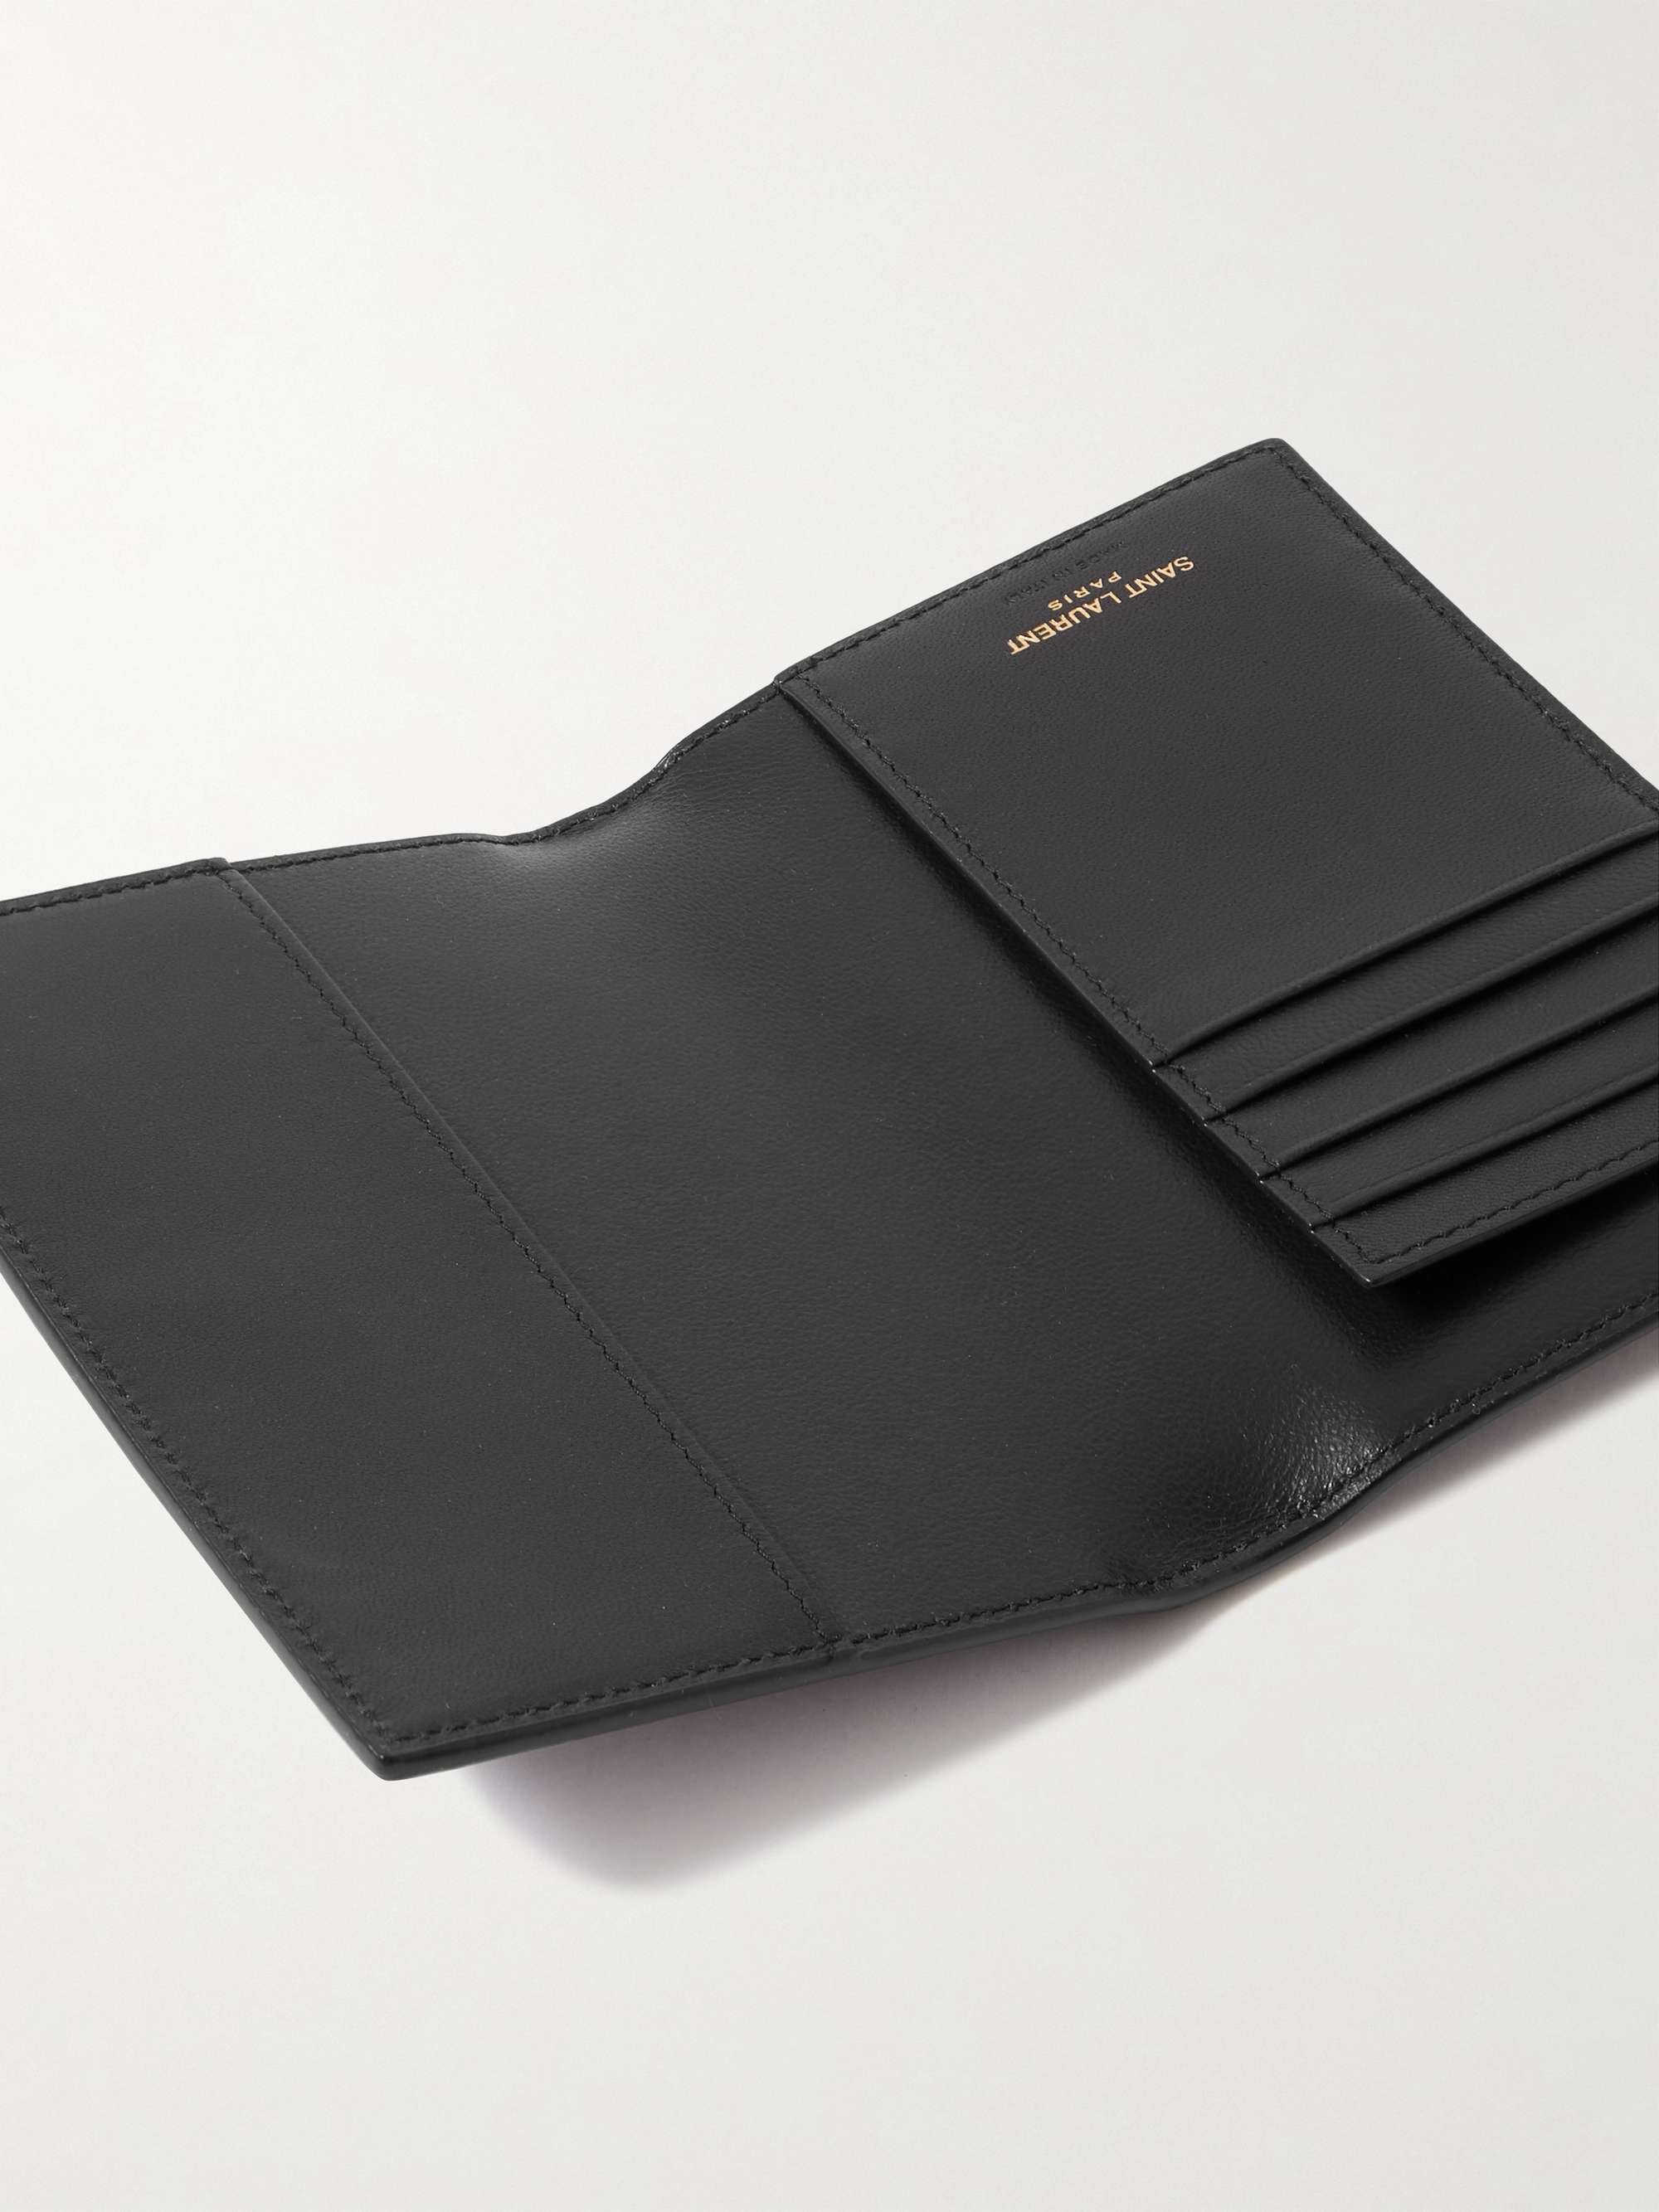 Saint Laurent (YSL) Passport Case Holder - Overview and First